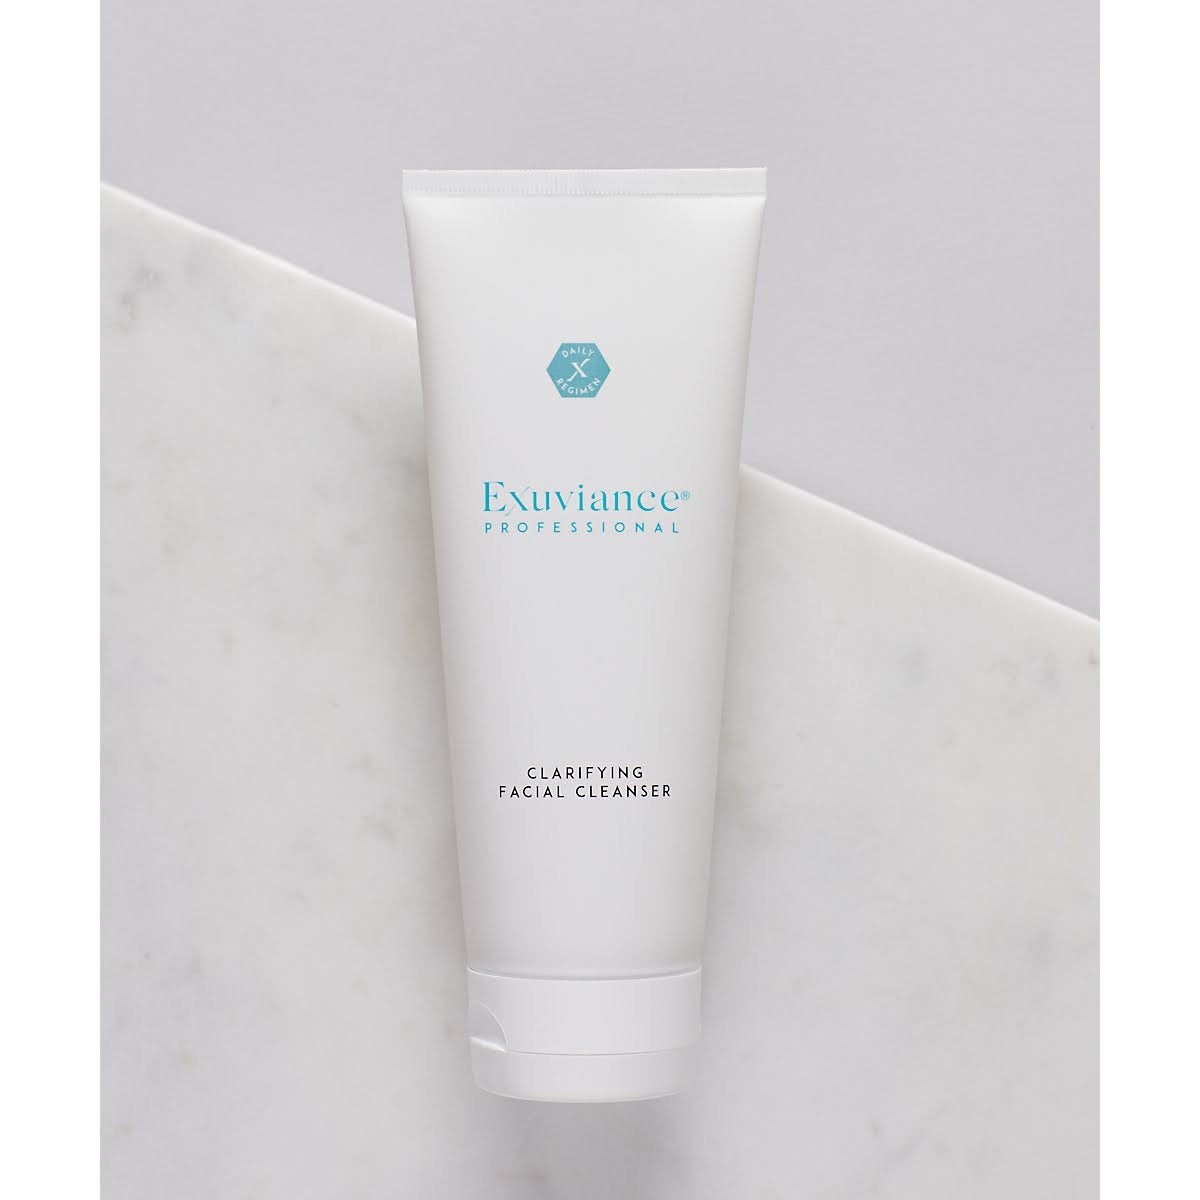 Clarifying Facial cleanser acne